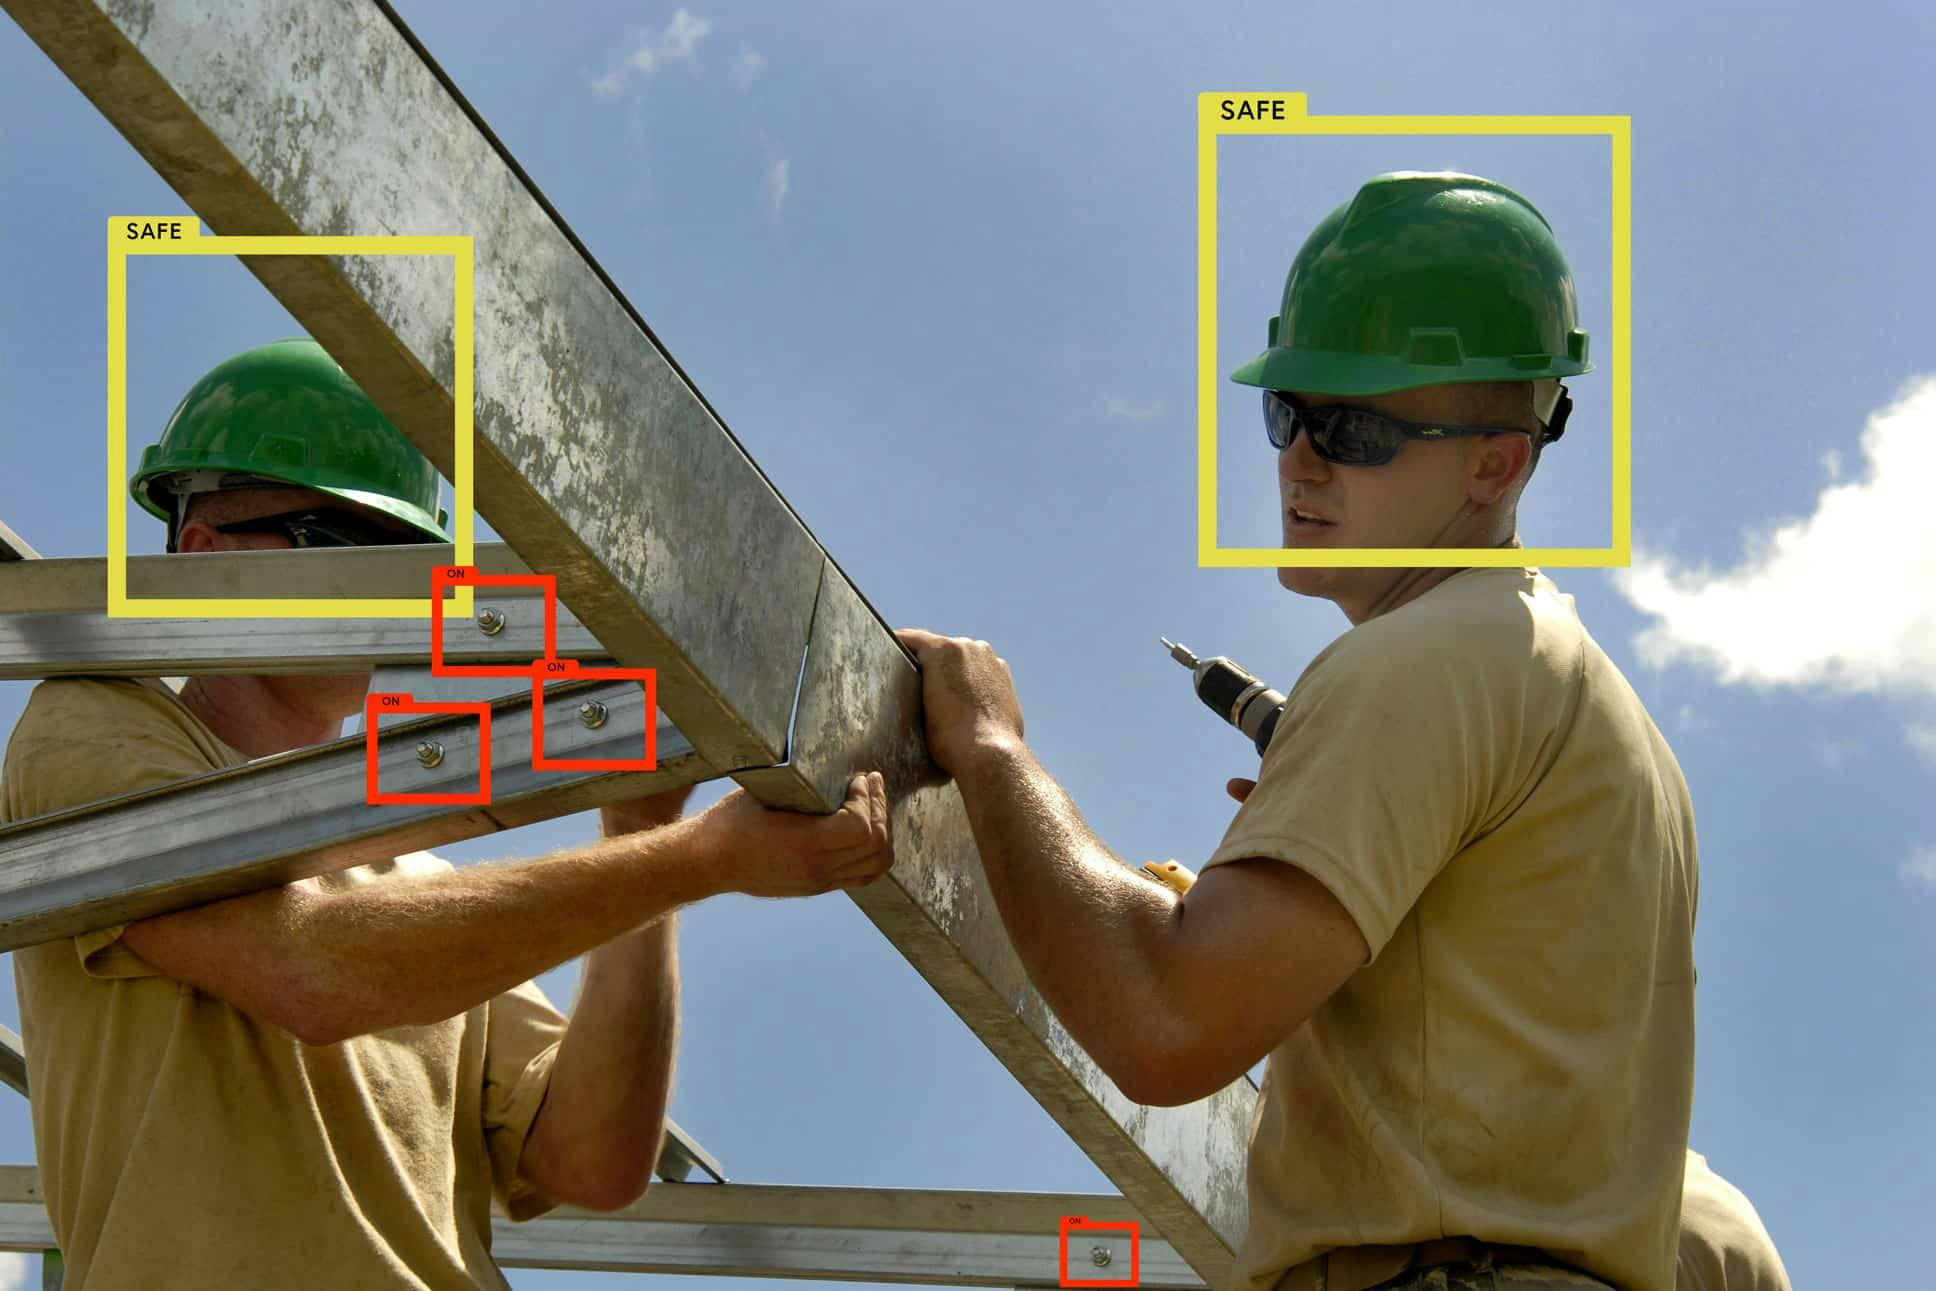 Field technicians working, image recognition flagging the different aspects with red and yellow boxes/